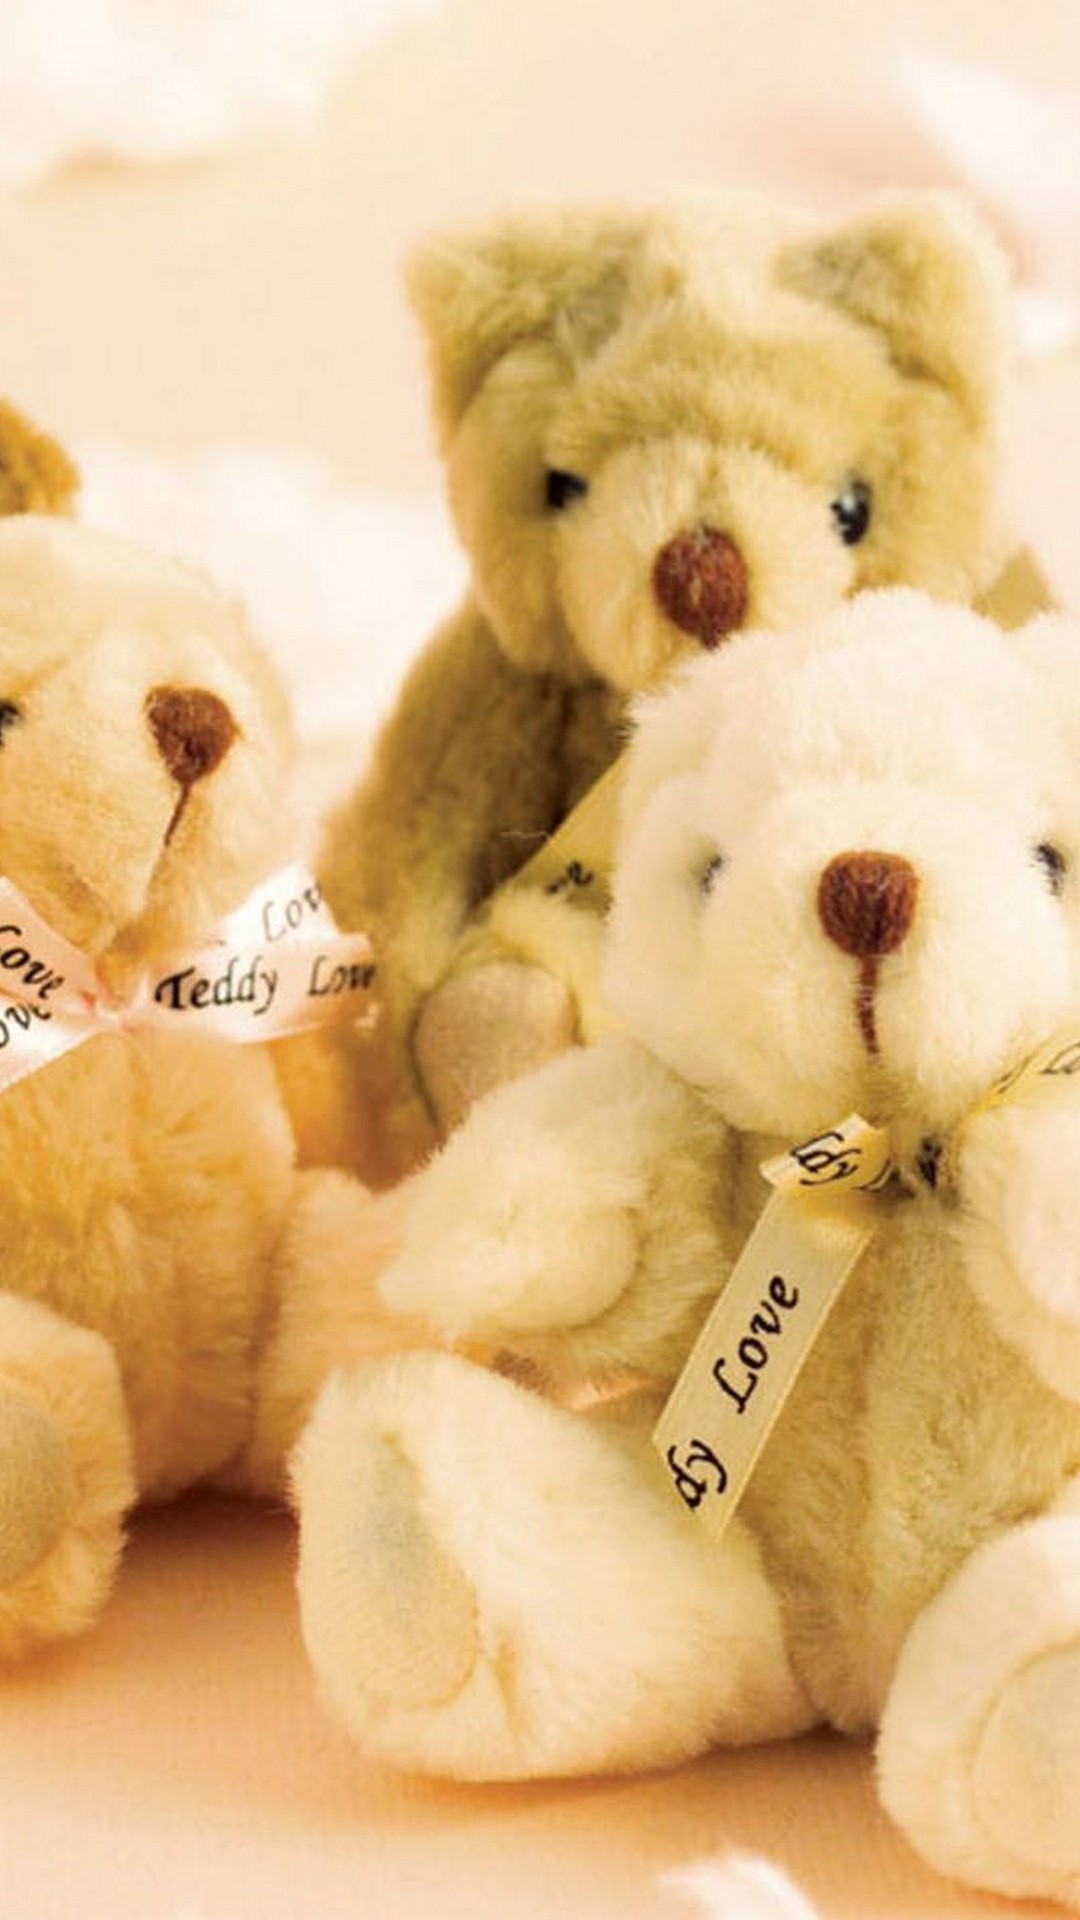 Wallpaper Android Cute Teddy Bear With Image Resolution - HD Wallpaper 